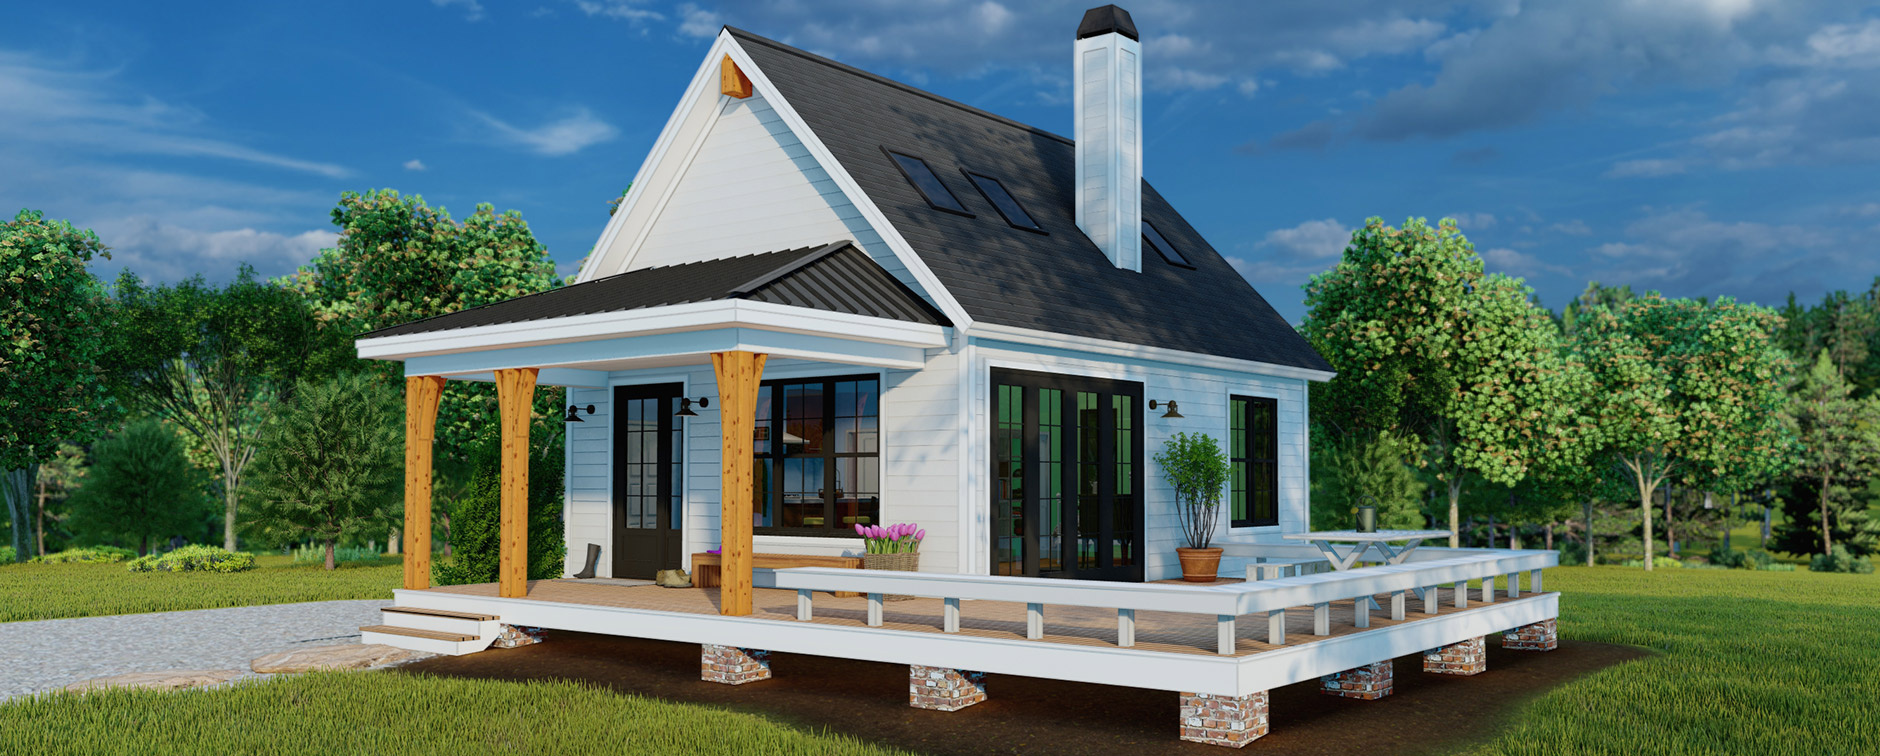 Explore Small House Plans and Tiny Home Plans